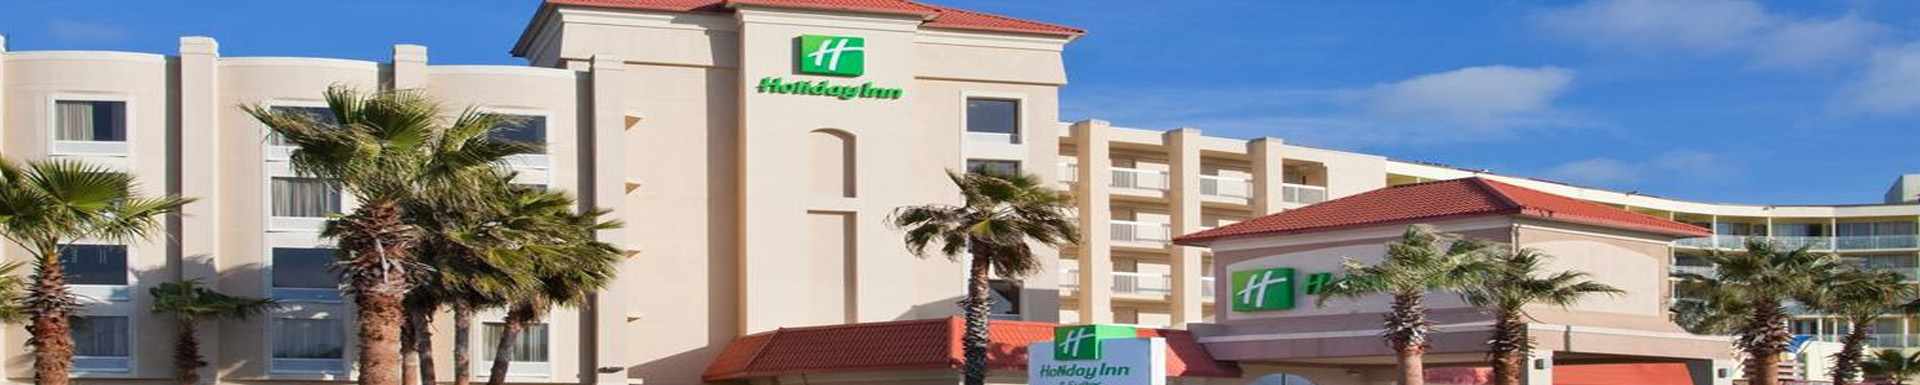 Holiday Inn Hotel & Suites on the Ocean